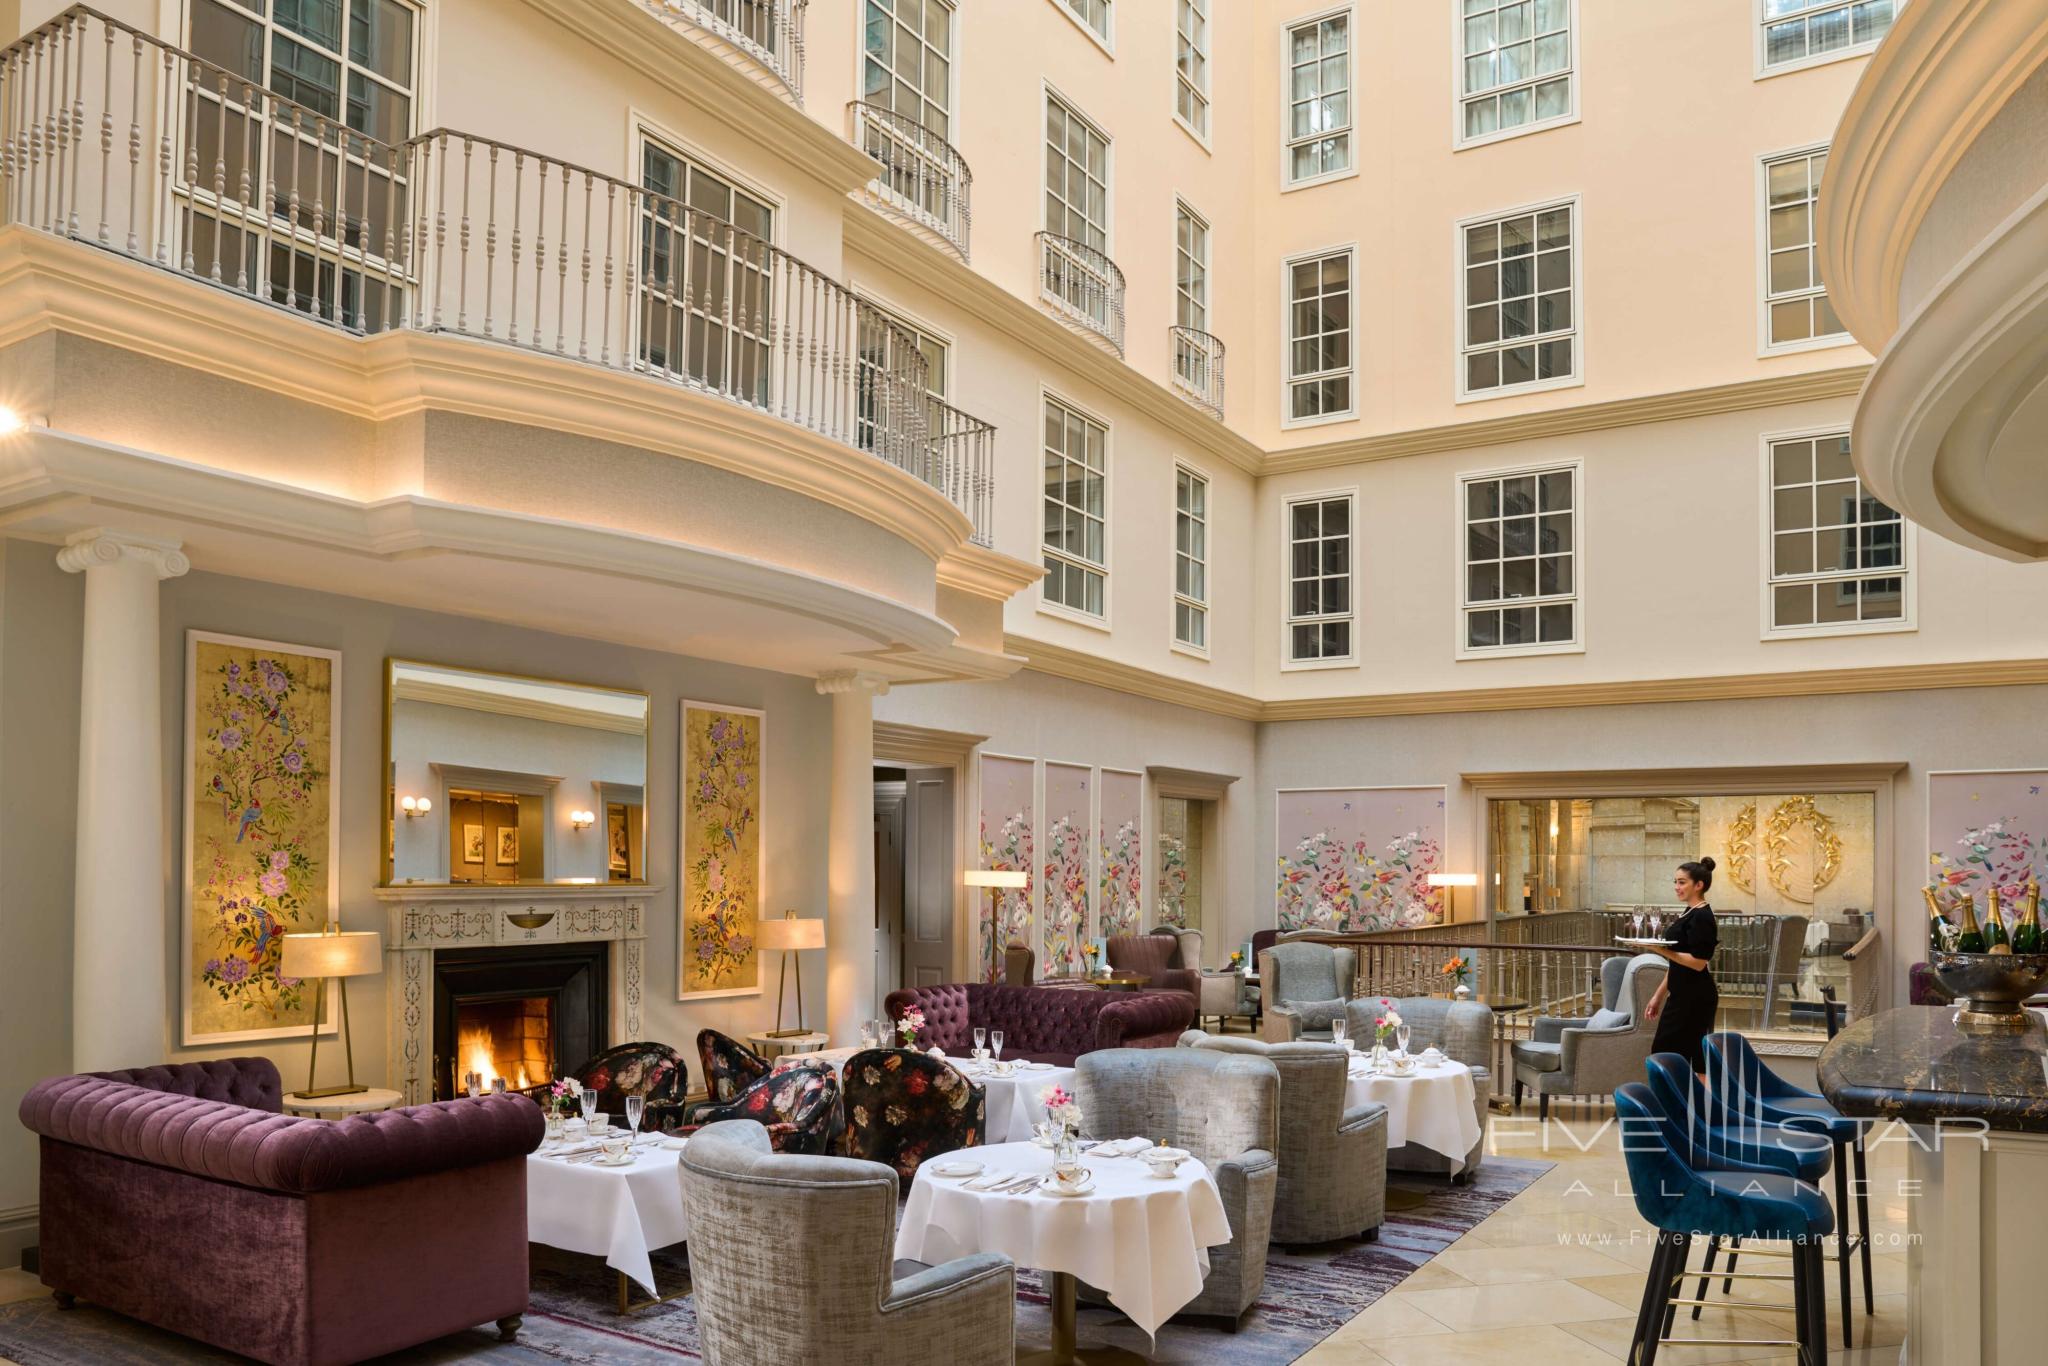 Photo Gallery For The College Green Hotel Dublin Formerly The Westin Five Star Alliance 